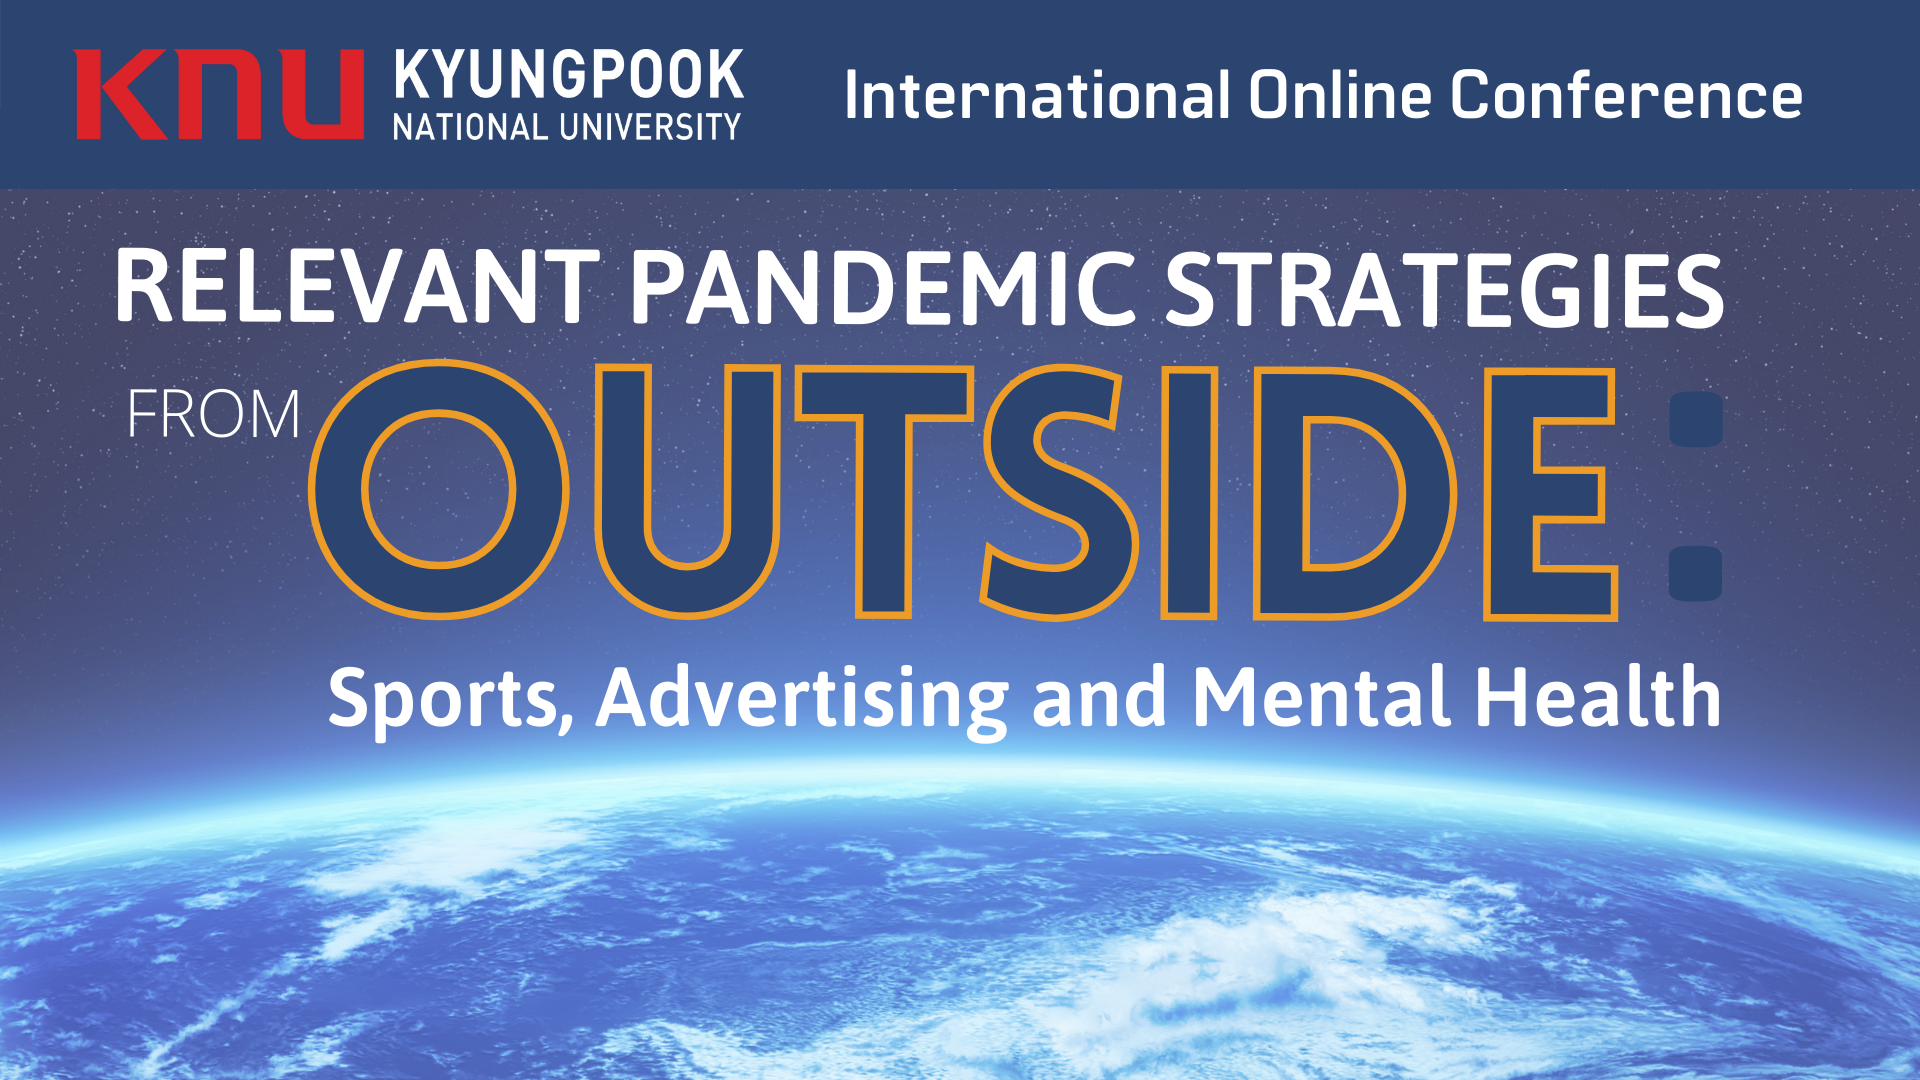 KNU Online Conference: Relevant Pandemic Strategies OUTSIDE-Sports, Advertising and Mental Health